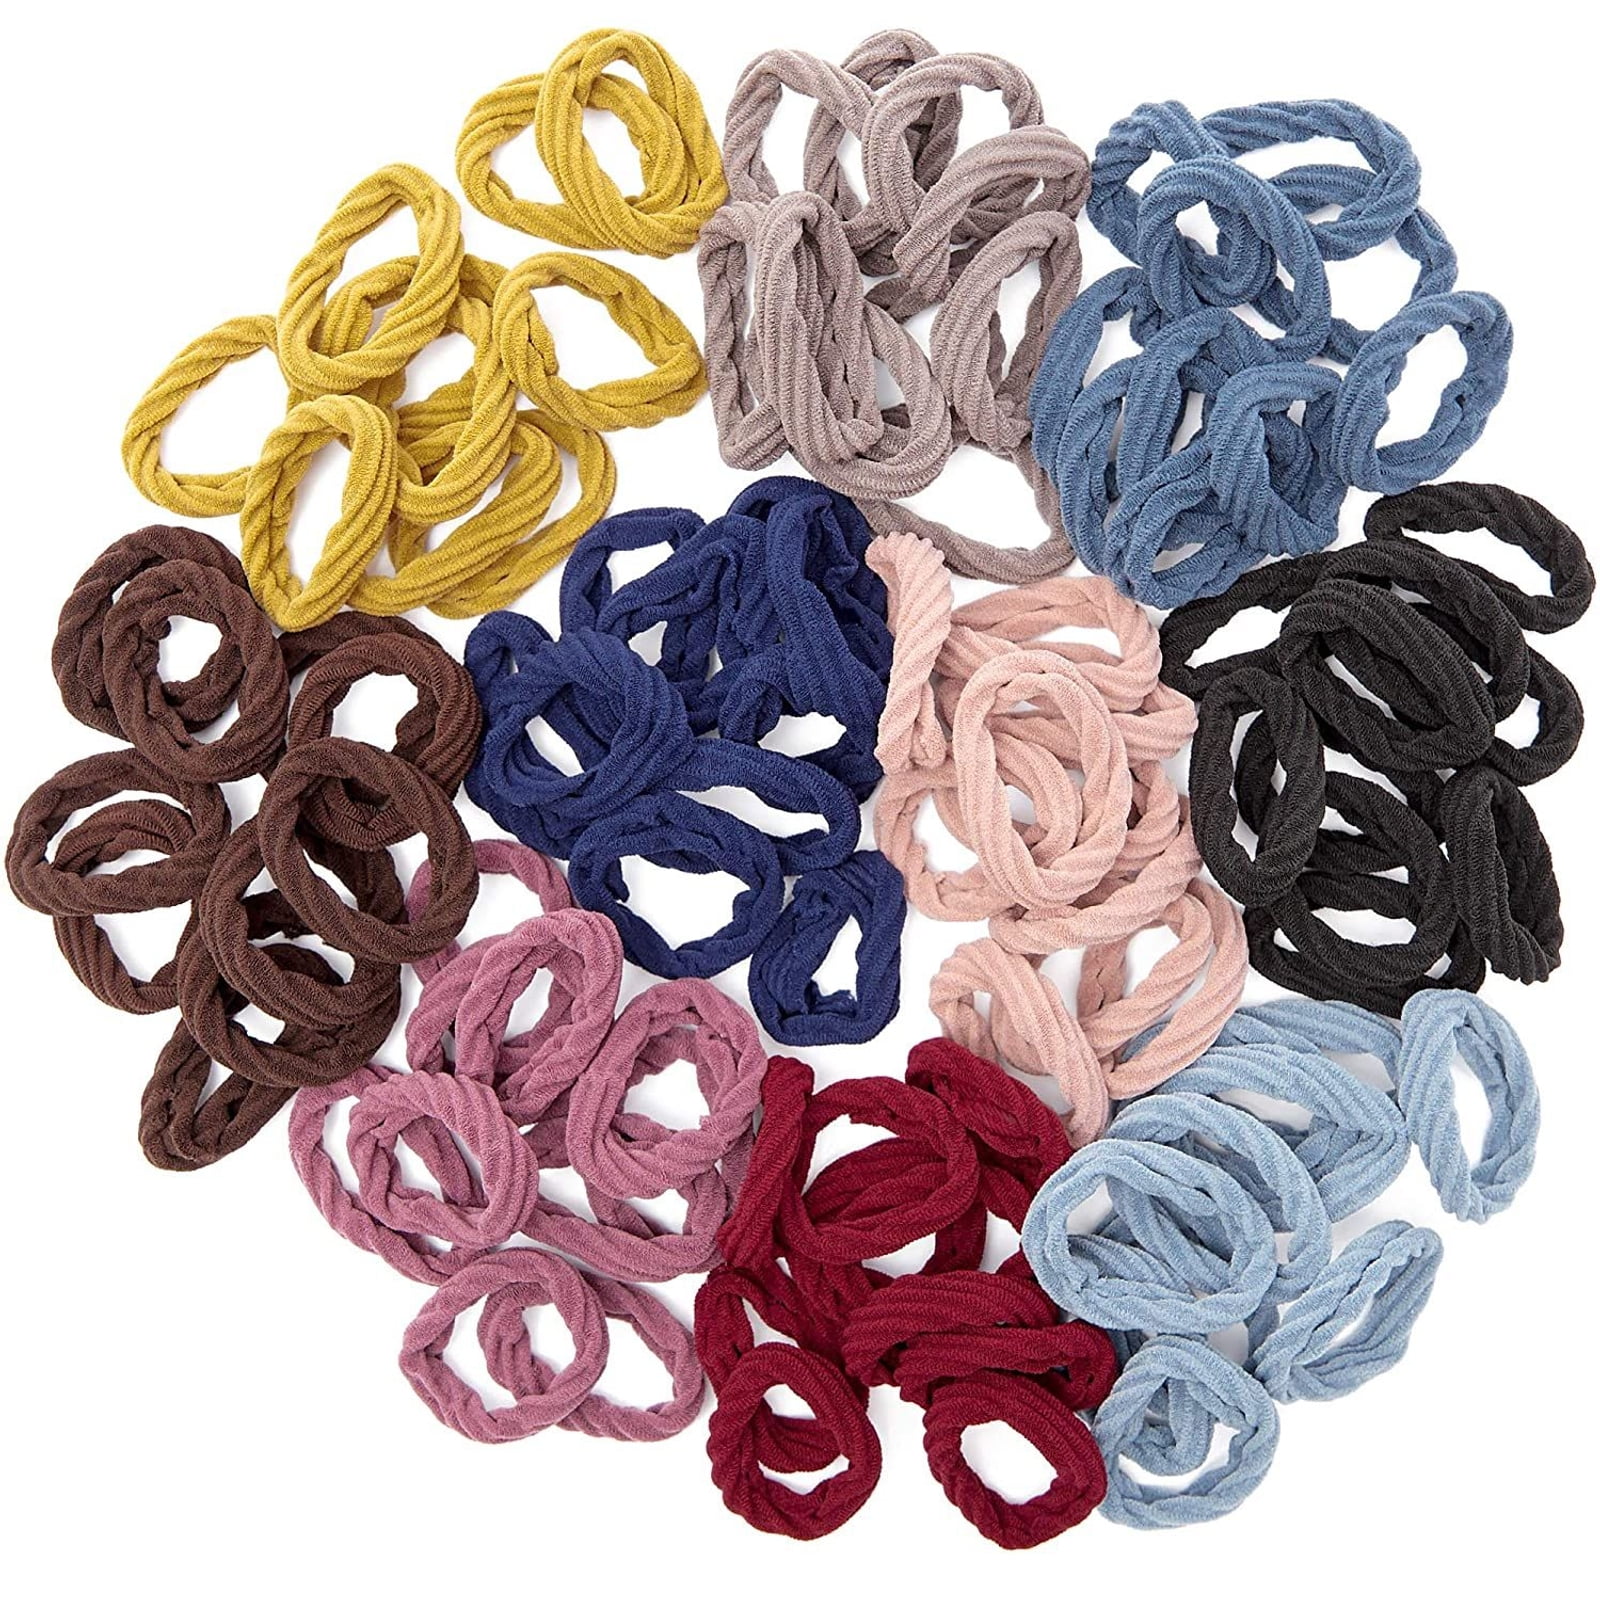 50 Mixed Color Soft Fabric Elastic Hair Ties Rope Band Mini Ponytail Holder 